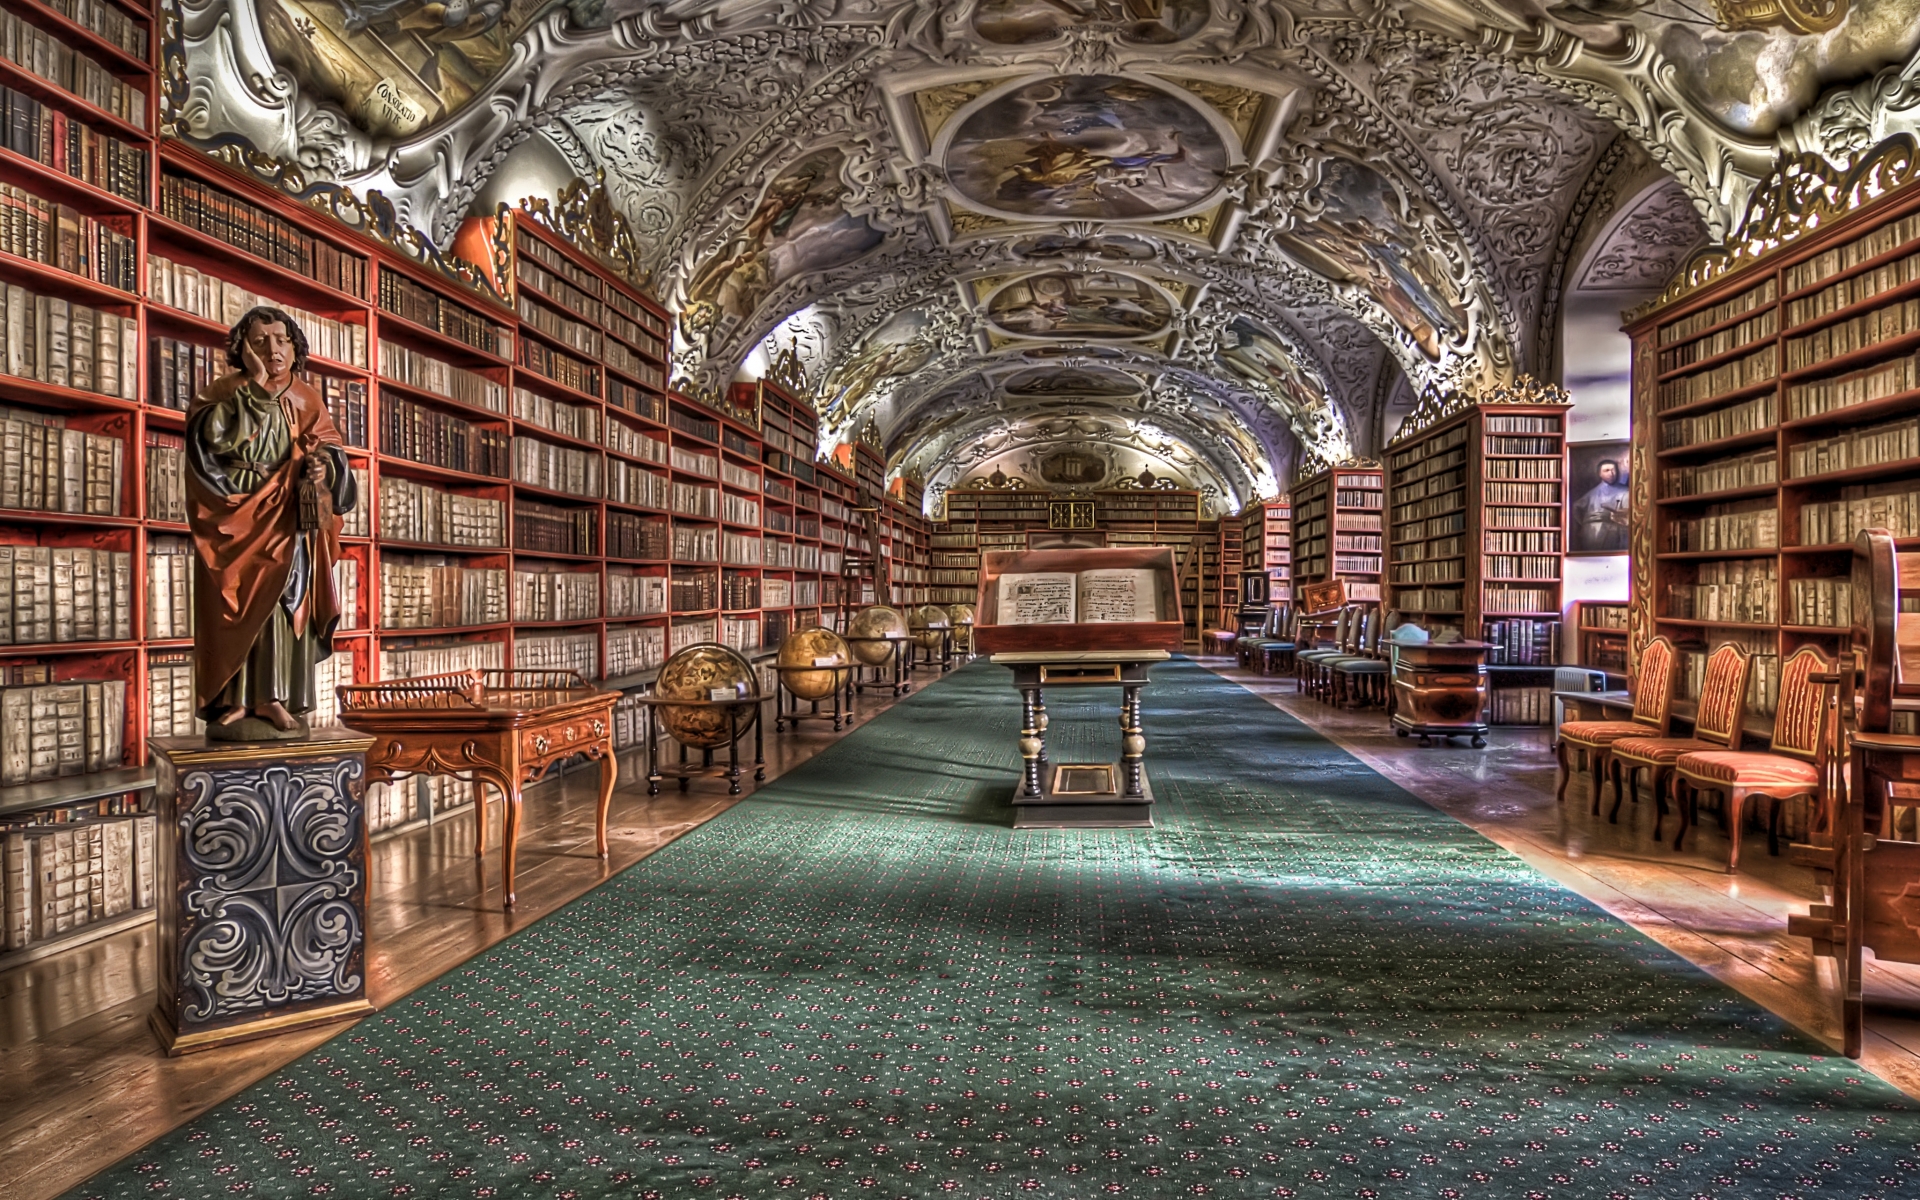 world, Architecture, Rooms, Library, Books, Hdr Wallpaper